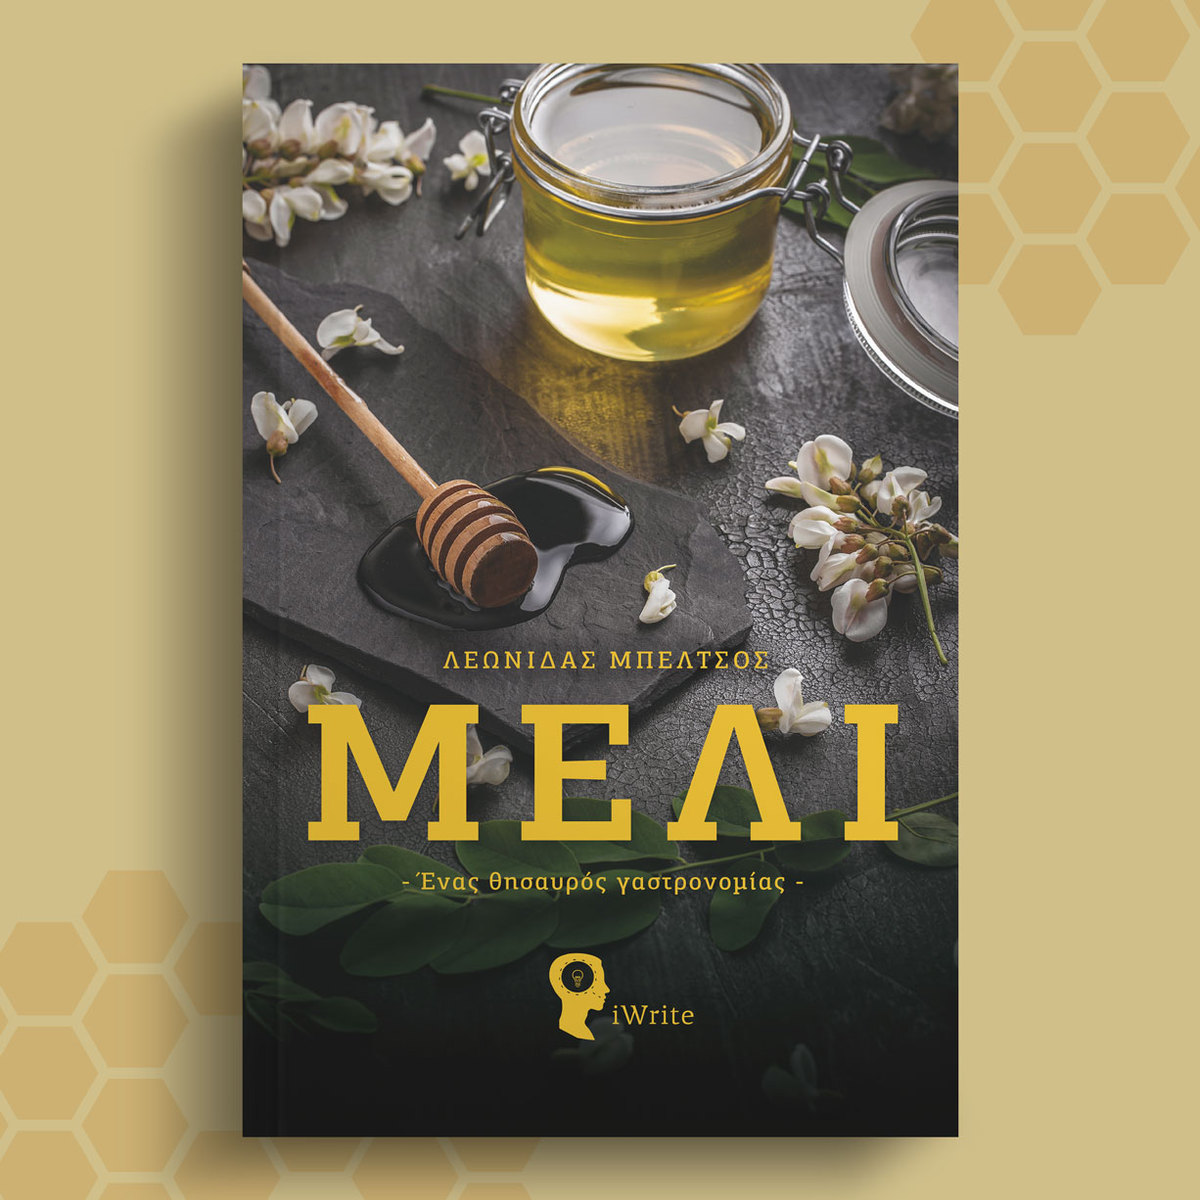 book about honey